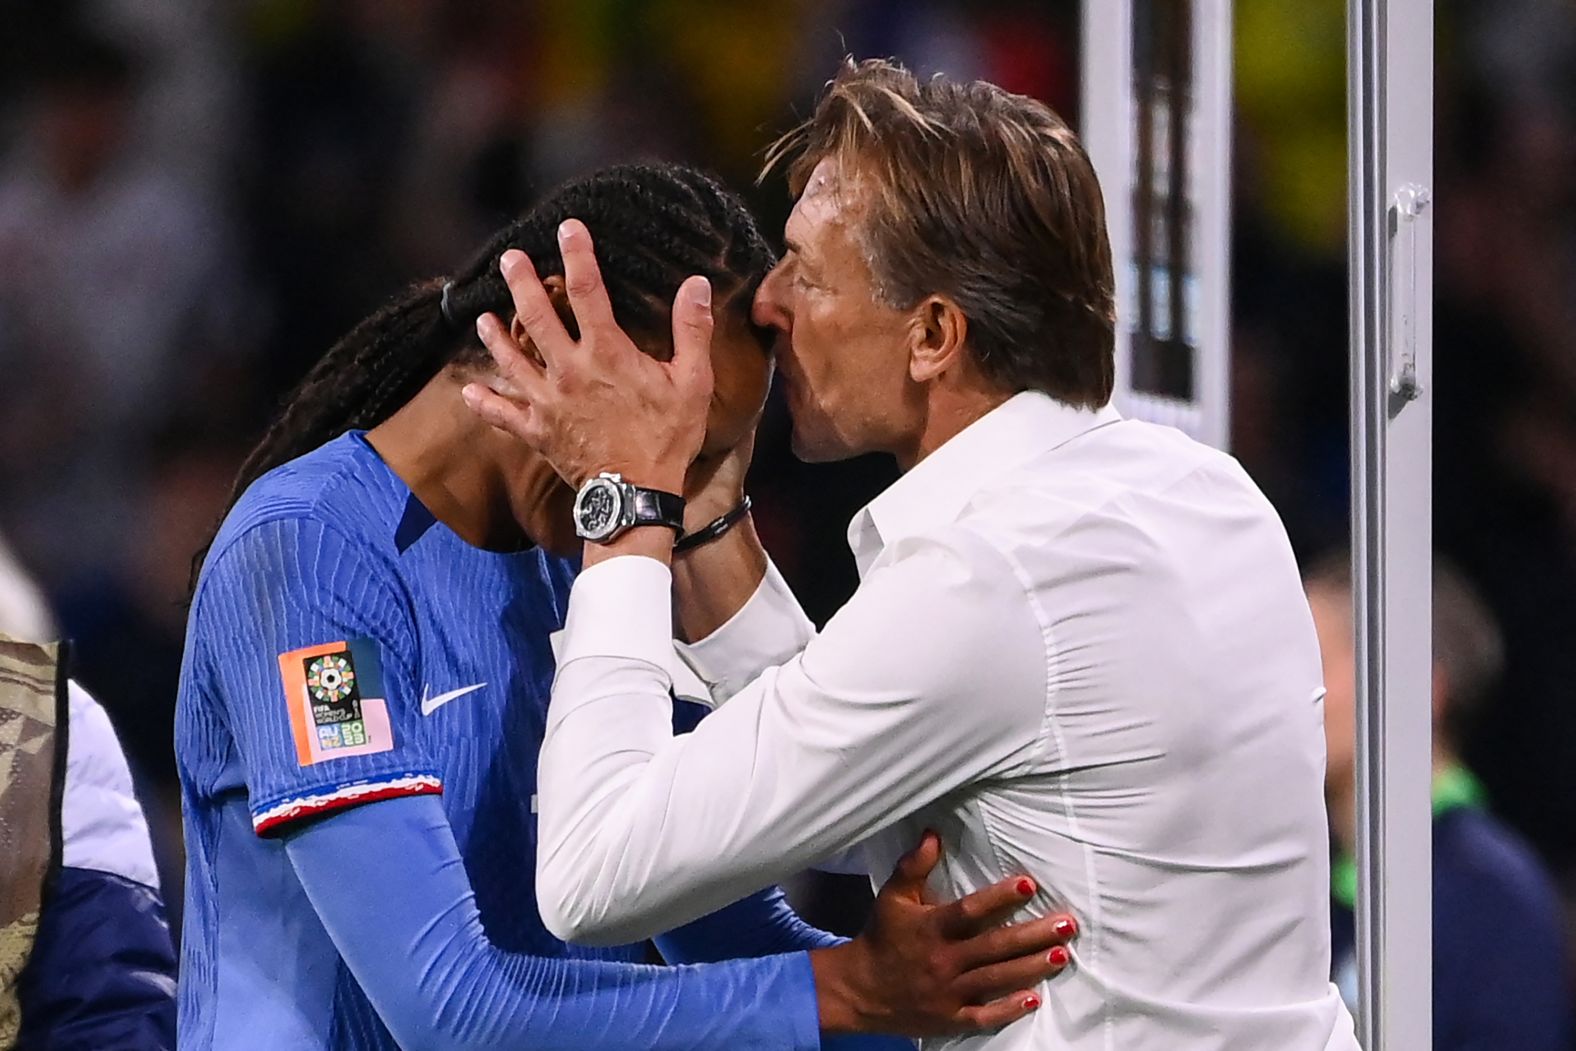 French coach Herve Renard kisses defender Wendie Renard on the forehead after her winning goal secured a <a href="index.php?page=&url=https%3A%2F%2Fwww.cnn.com%2F2023%2F07%2F28%2Ffootball%2Ffrance-brazil-jamaica-panama-sweden-italy-womens-world-cup-spt-intl%2Findex.html" target="_blank">2-1 win against Brazil</a> on July 29.